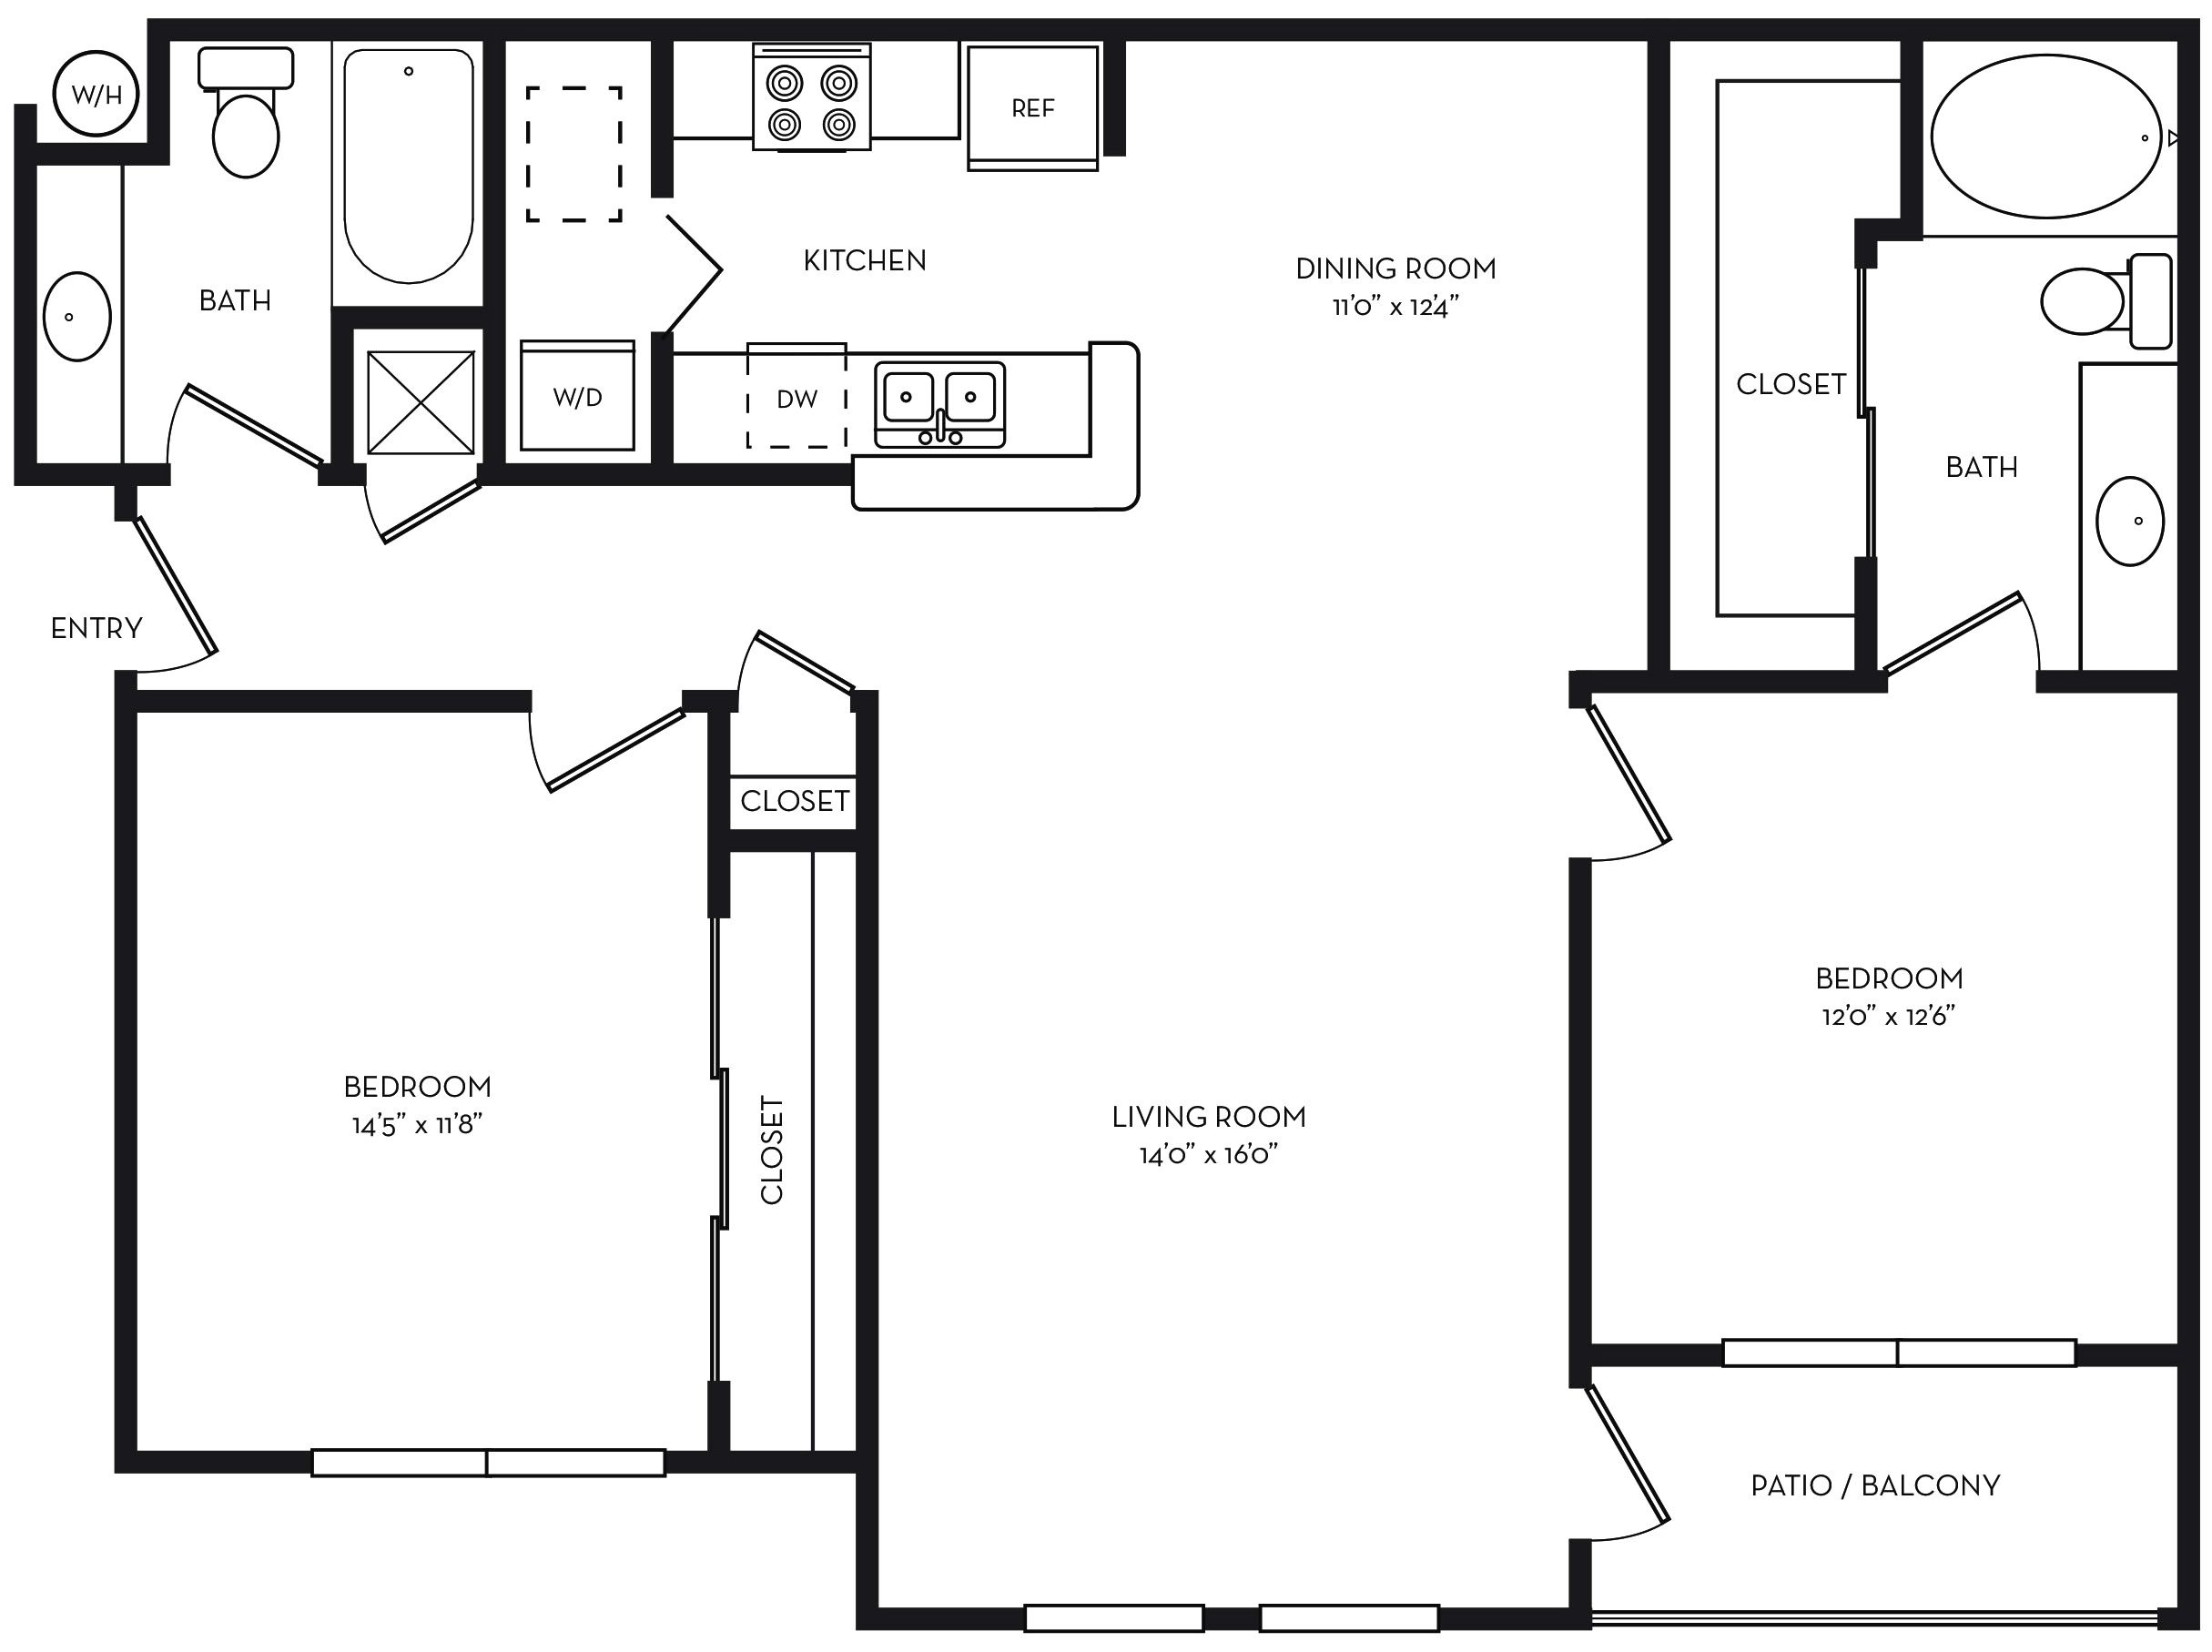 Small Galley Kitchen Floor Plans / Do you find galley